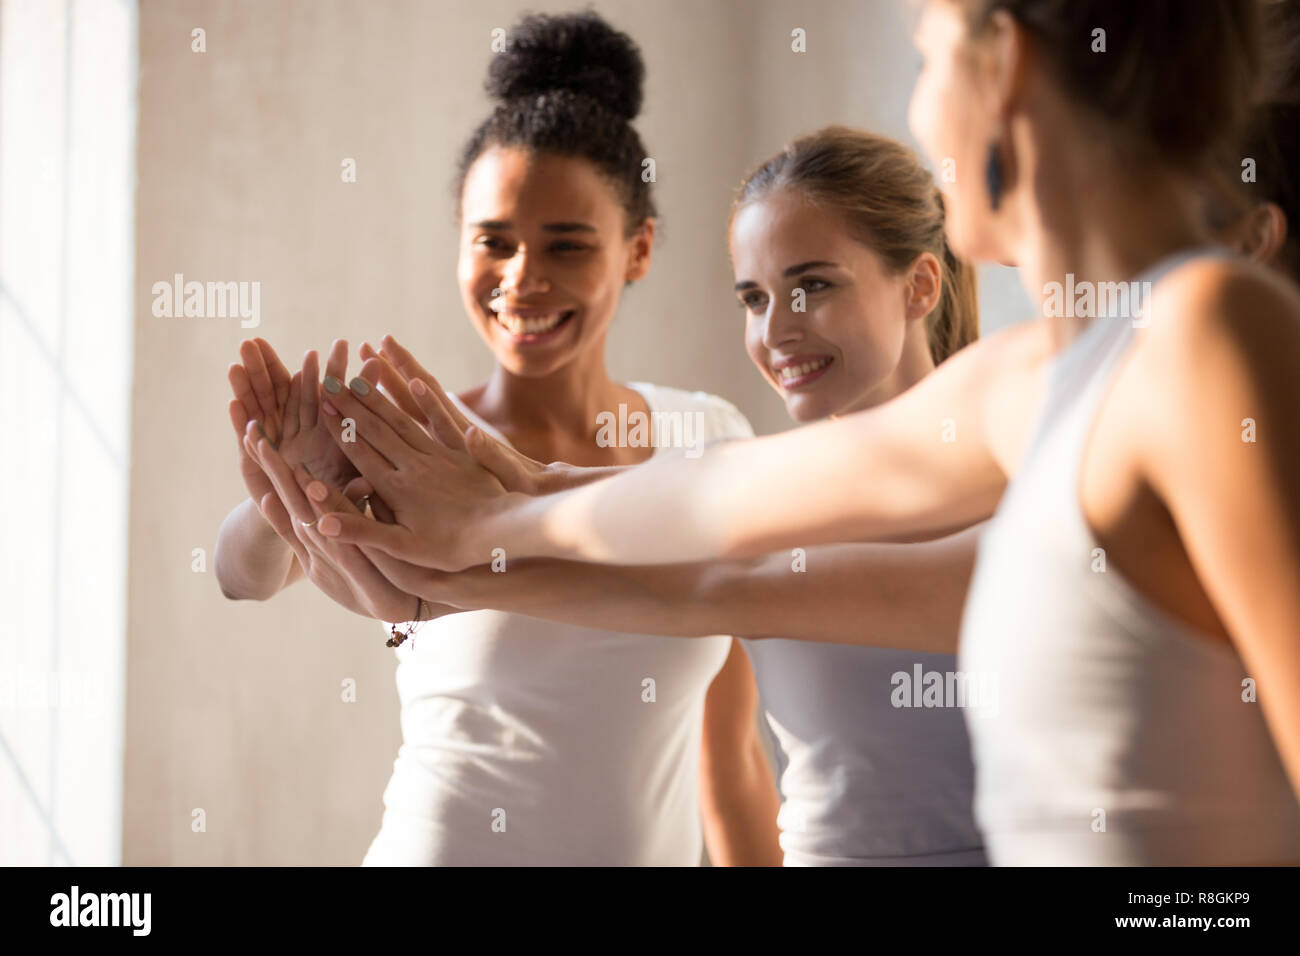 Females putting hands together, close up focus on palms  Stock Photo